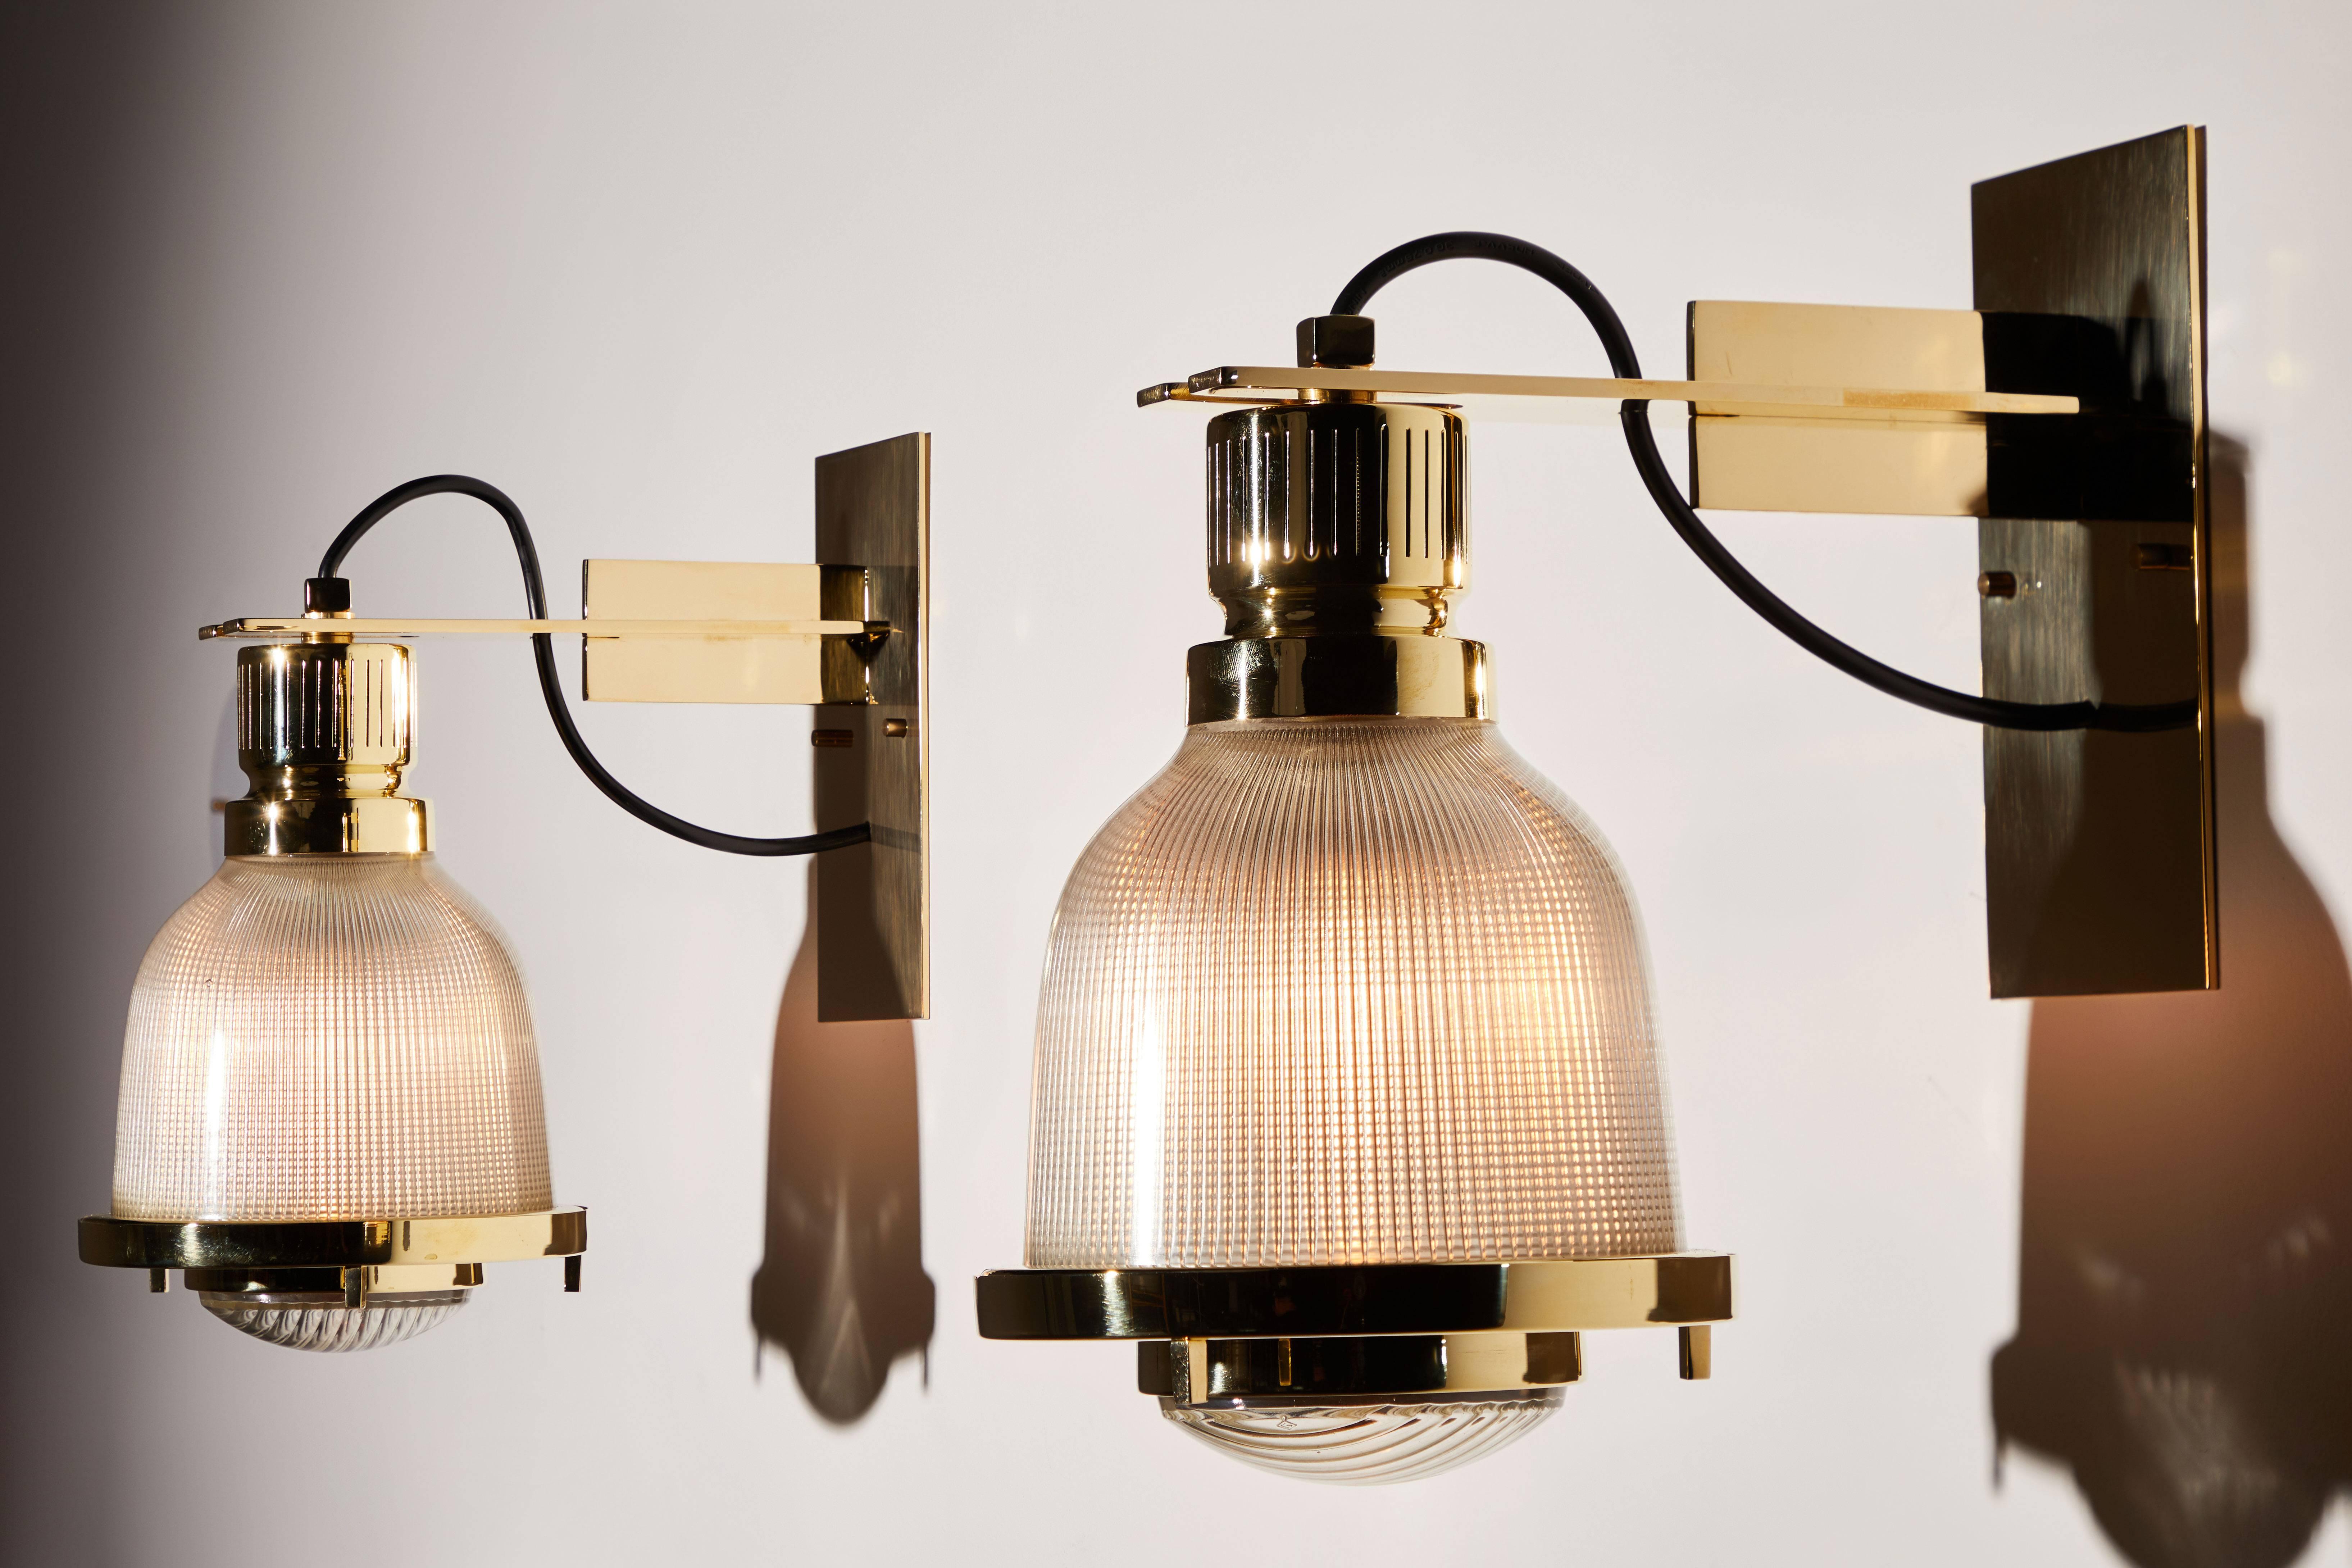 Four sconces designed by Guiseppi Ostuni and manufactured in Italy, by Oluce circa 1960s. Fully restored brass and holophane glass. Rewired for US junction boxes. Each light takes one E14 60 watt maximum European candelabra bulbs. Please read